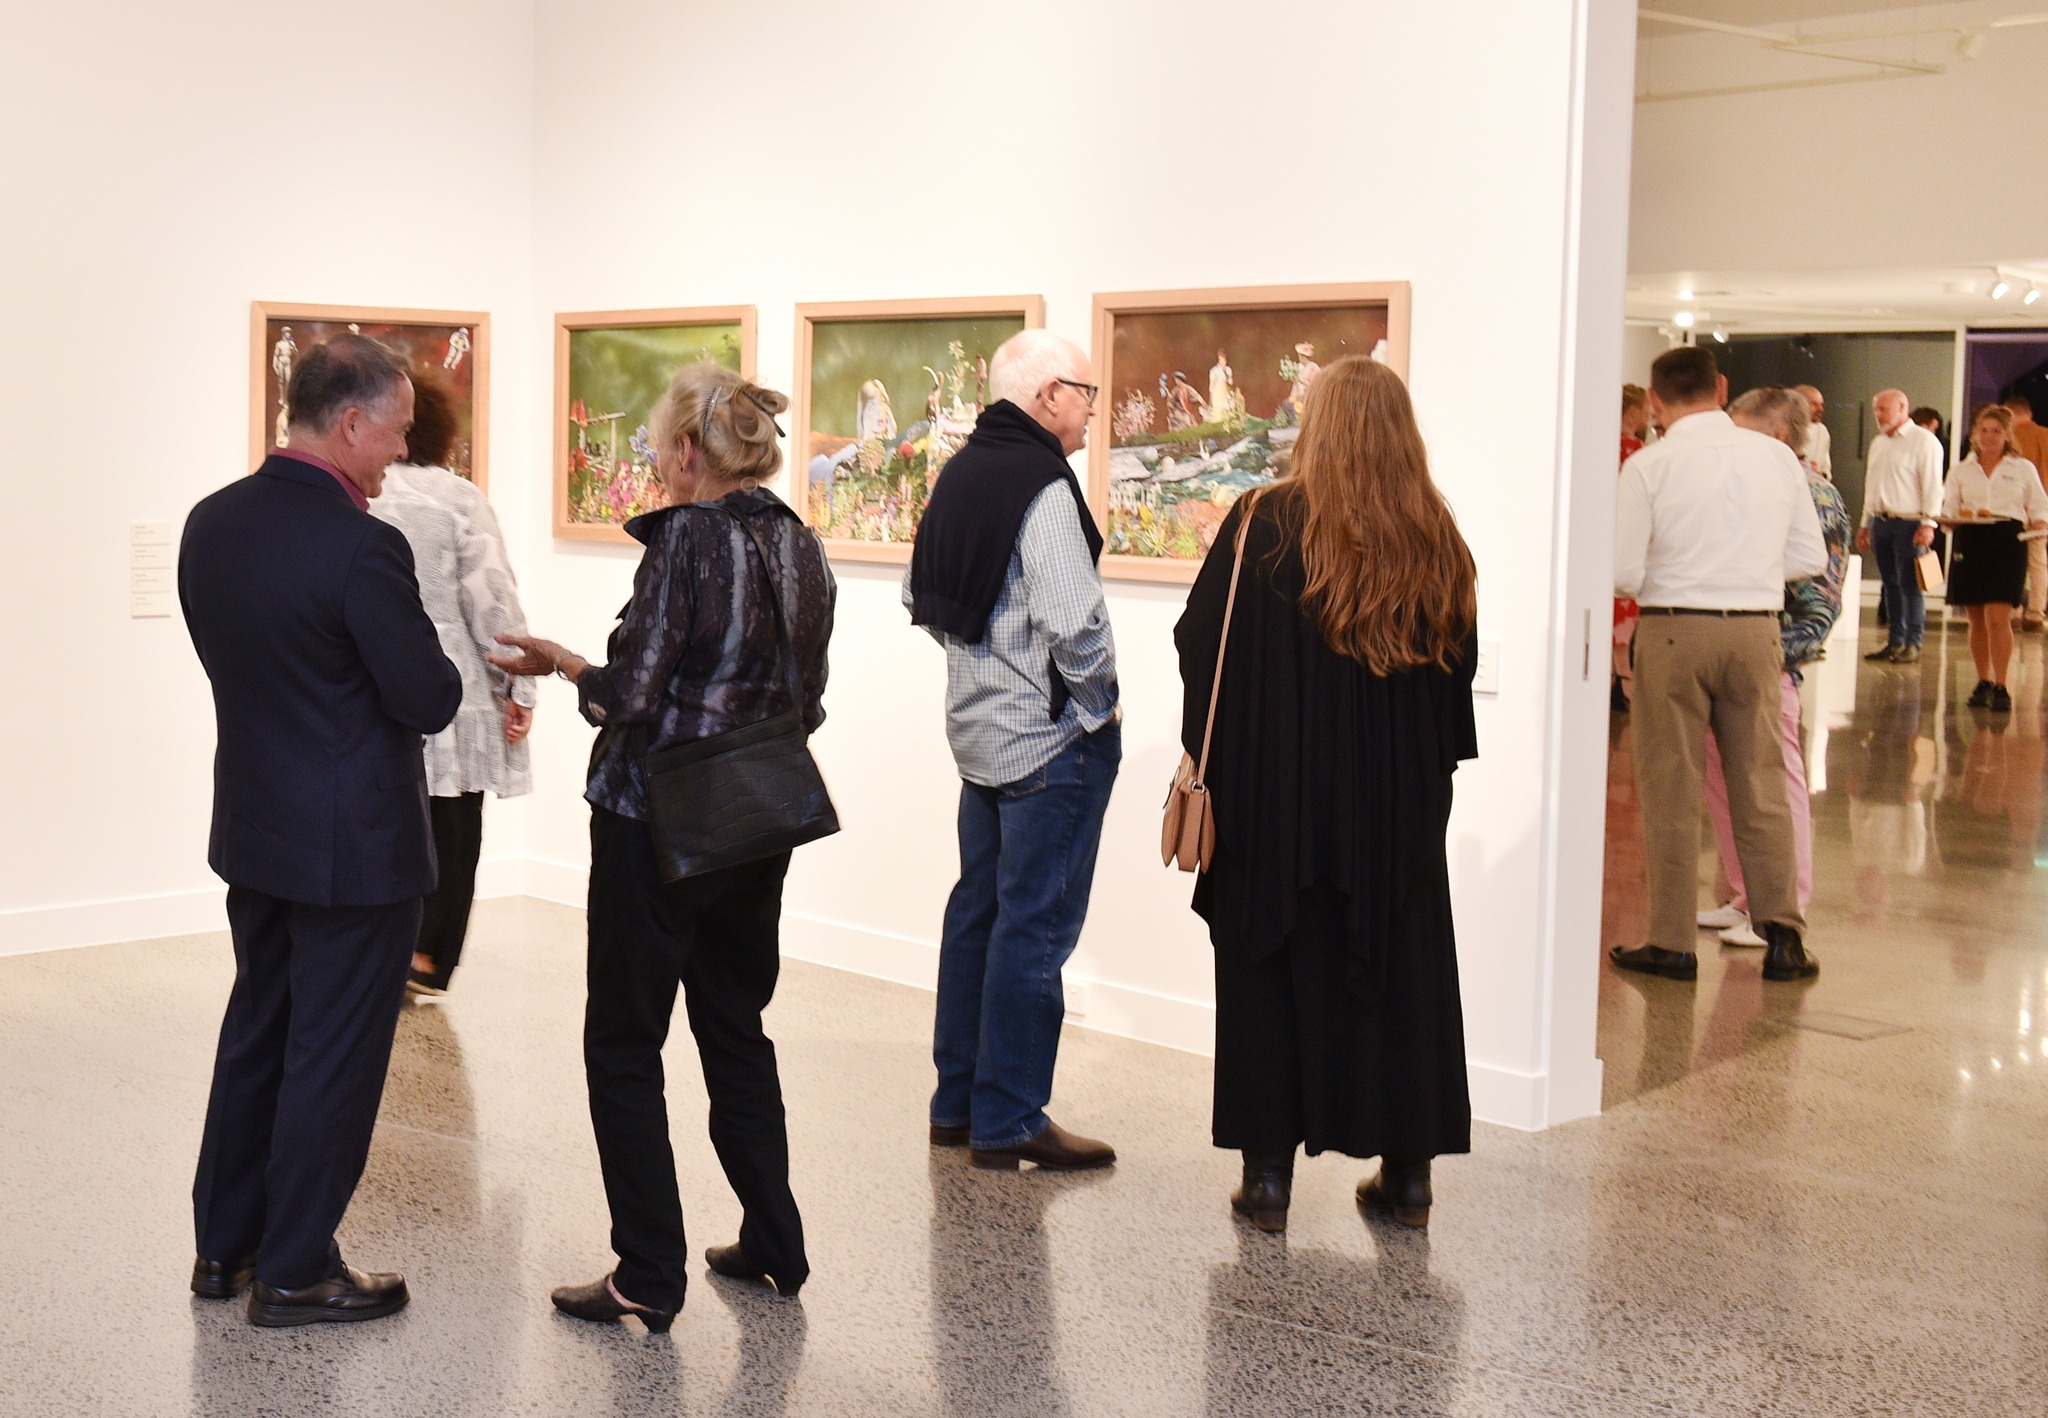 Gallery visitors take in opening exhibition Wildflowering by Design. Photo: Alistair Brightman